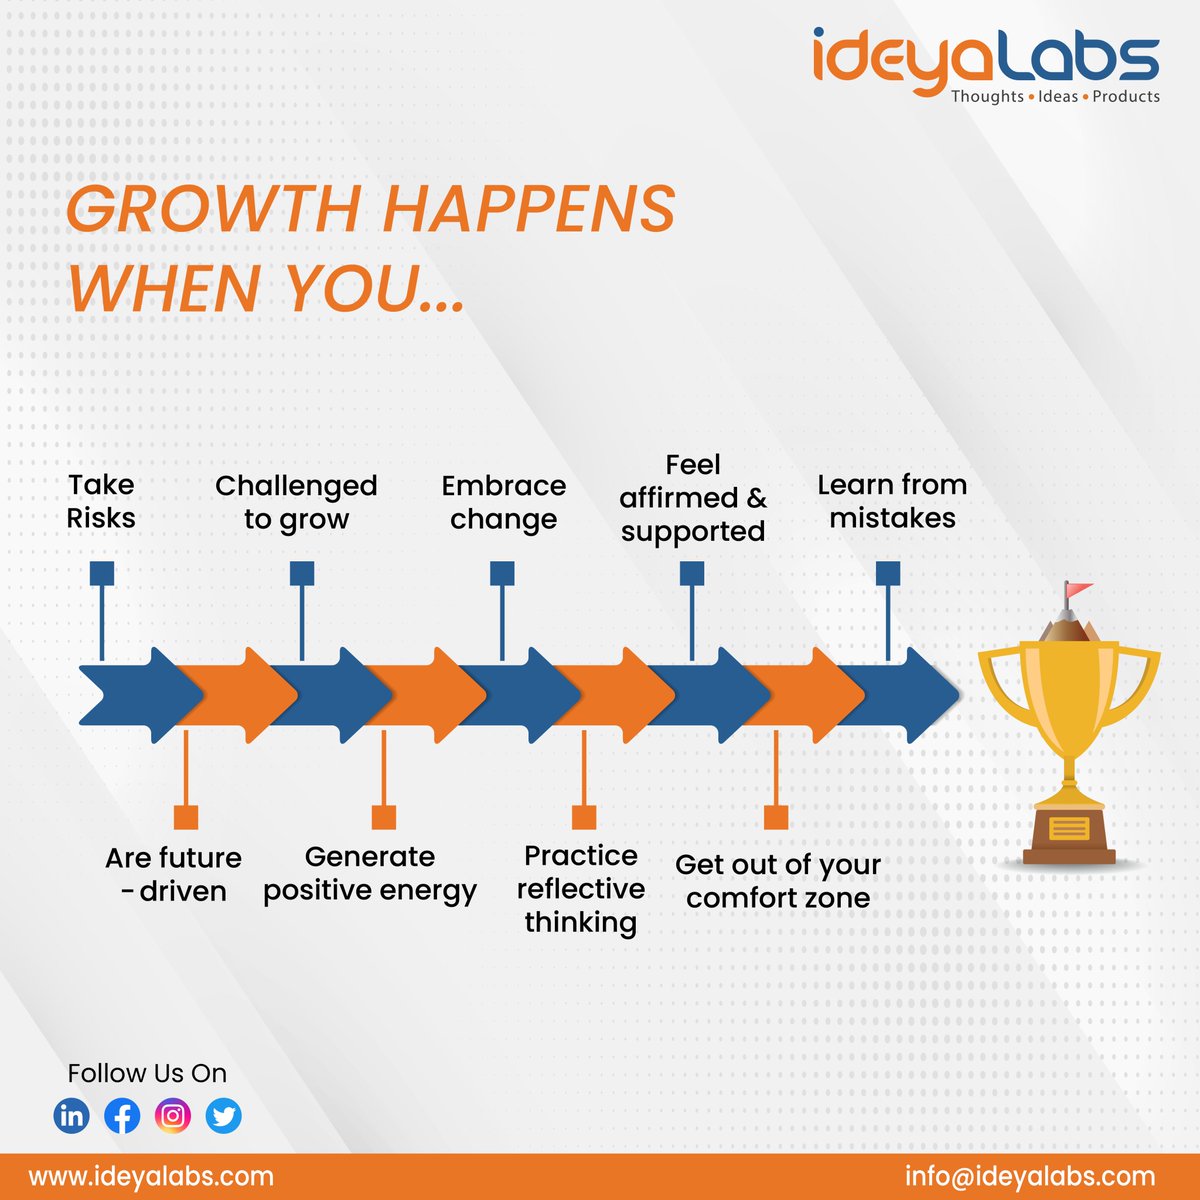 Growth Happens When You....
* Take Risks
* Challenged to grow
* Embrace change
* Feel affirmed & supported
* Learn from mistakes
* Are future - driven
* Generate positive energy
* Practice reflective thinking
* Get out of your comfort zone
#ideyaLabs #growth #future #fridayvibes